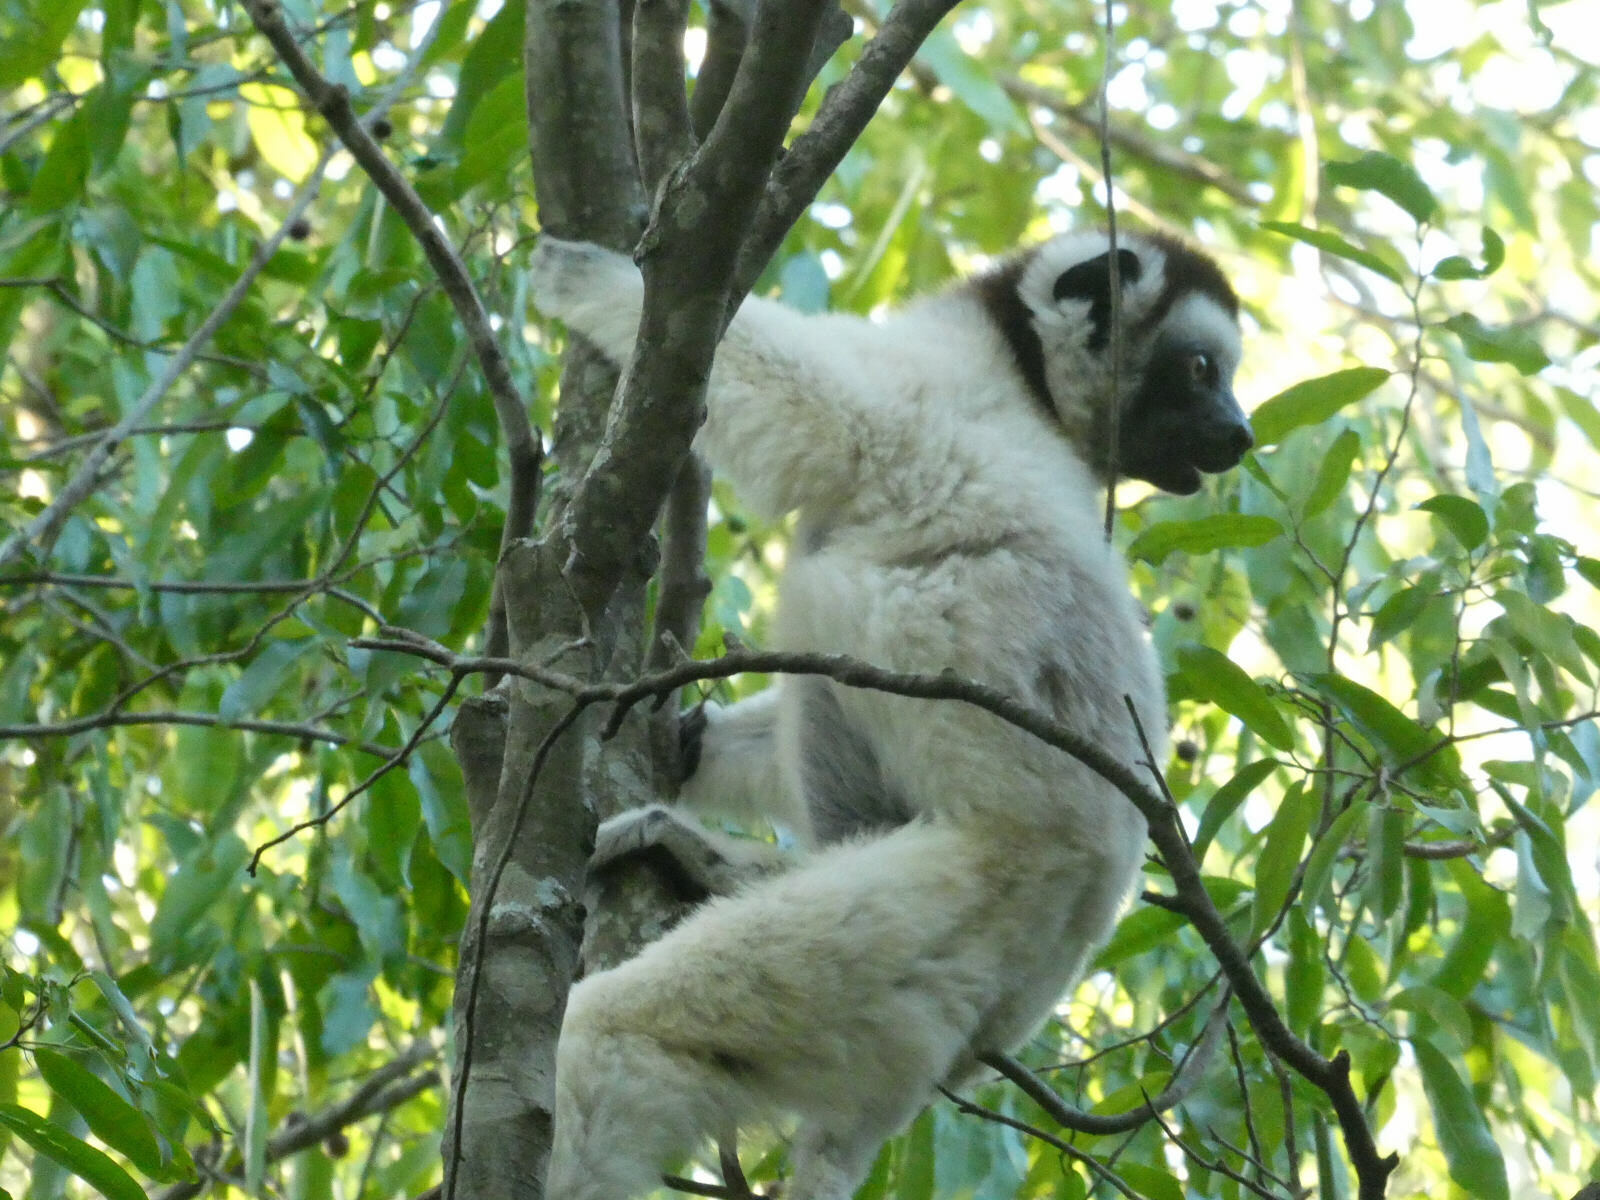 A Verraux's Sifaka at Berenty reserve in Madagascar